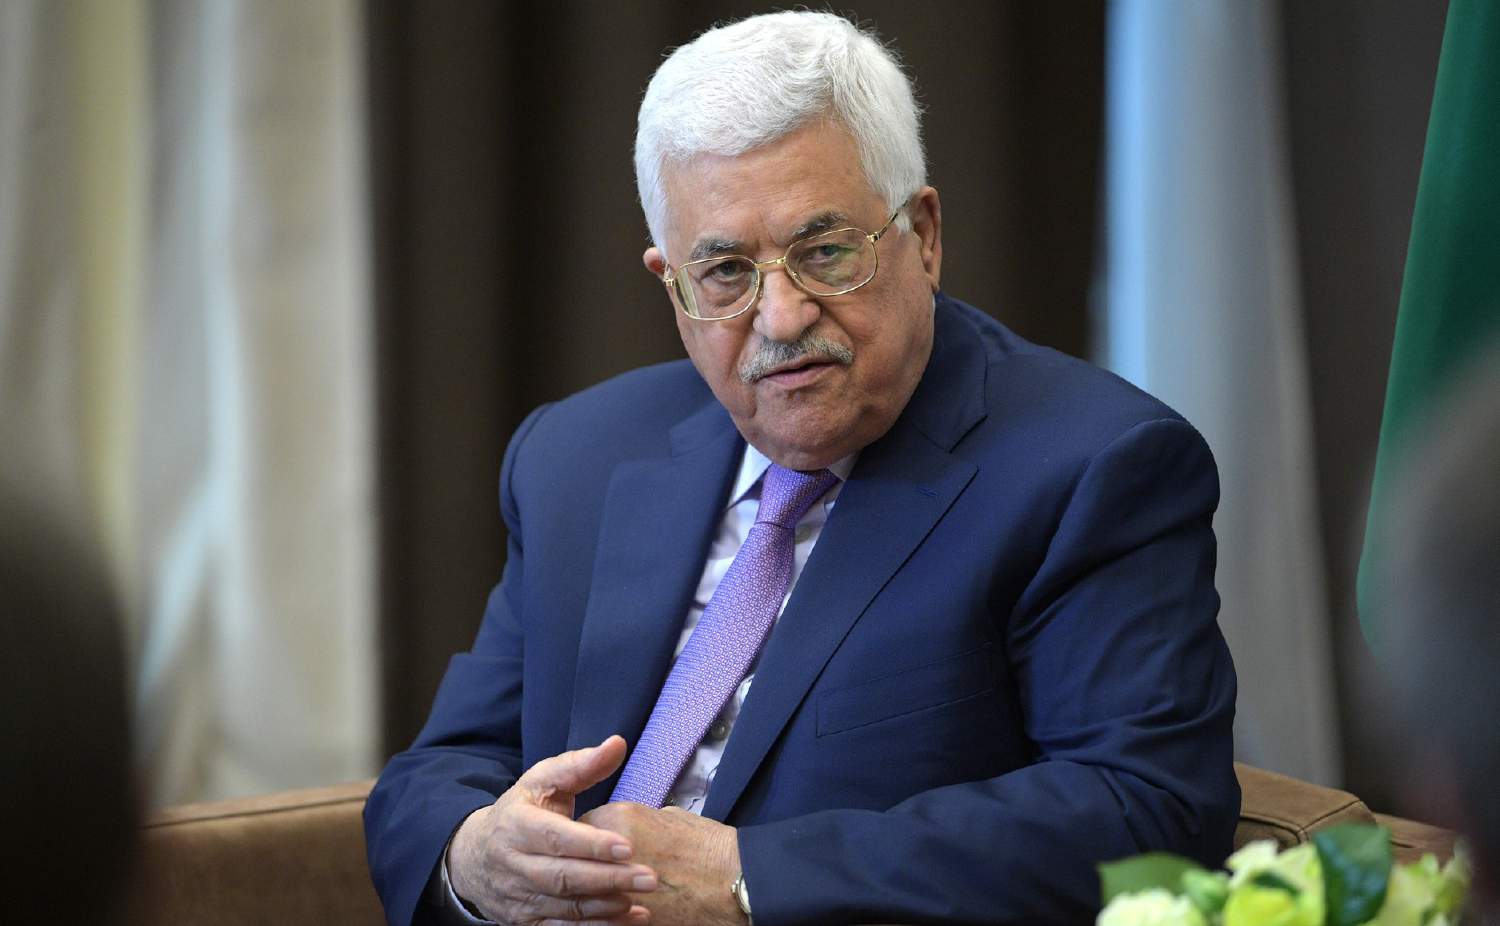 Palestinian leader reacts to Trump's Middle East Peace Plan